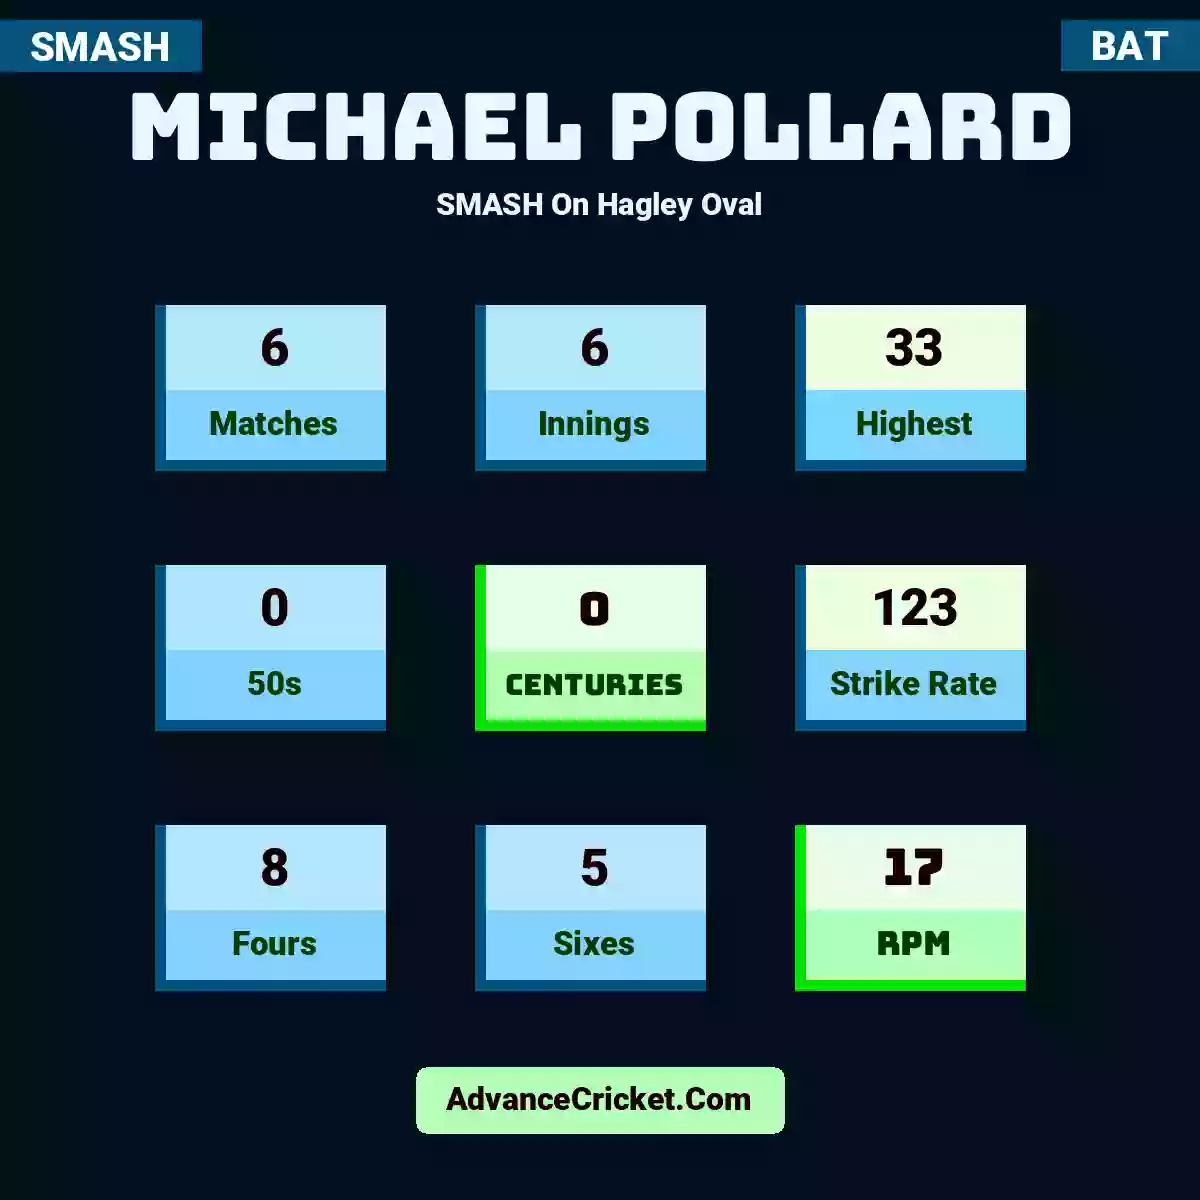 Michael Pollard SMASH  On Hagley Oval, Michael Pollard played 6 matches, scored 33 runs as highest, 0 half-centuries, and 0 centuries, with a strike rate of 123. M.Pollard hit 8 fours and 5 sixes, with an RPM of 17.